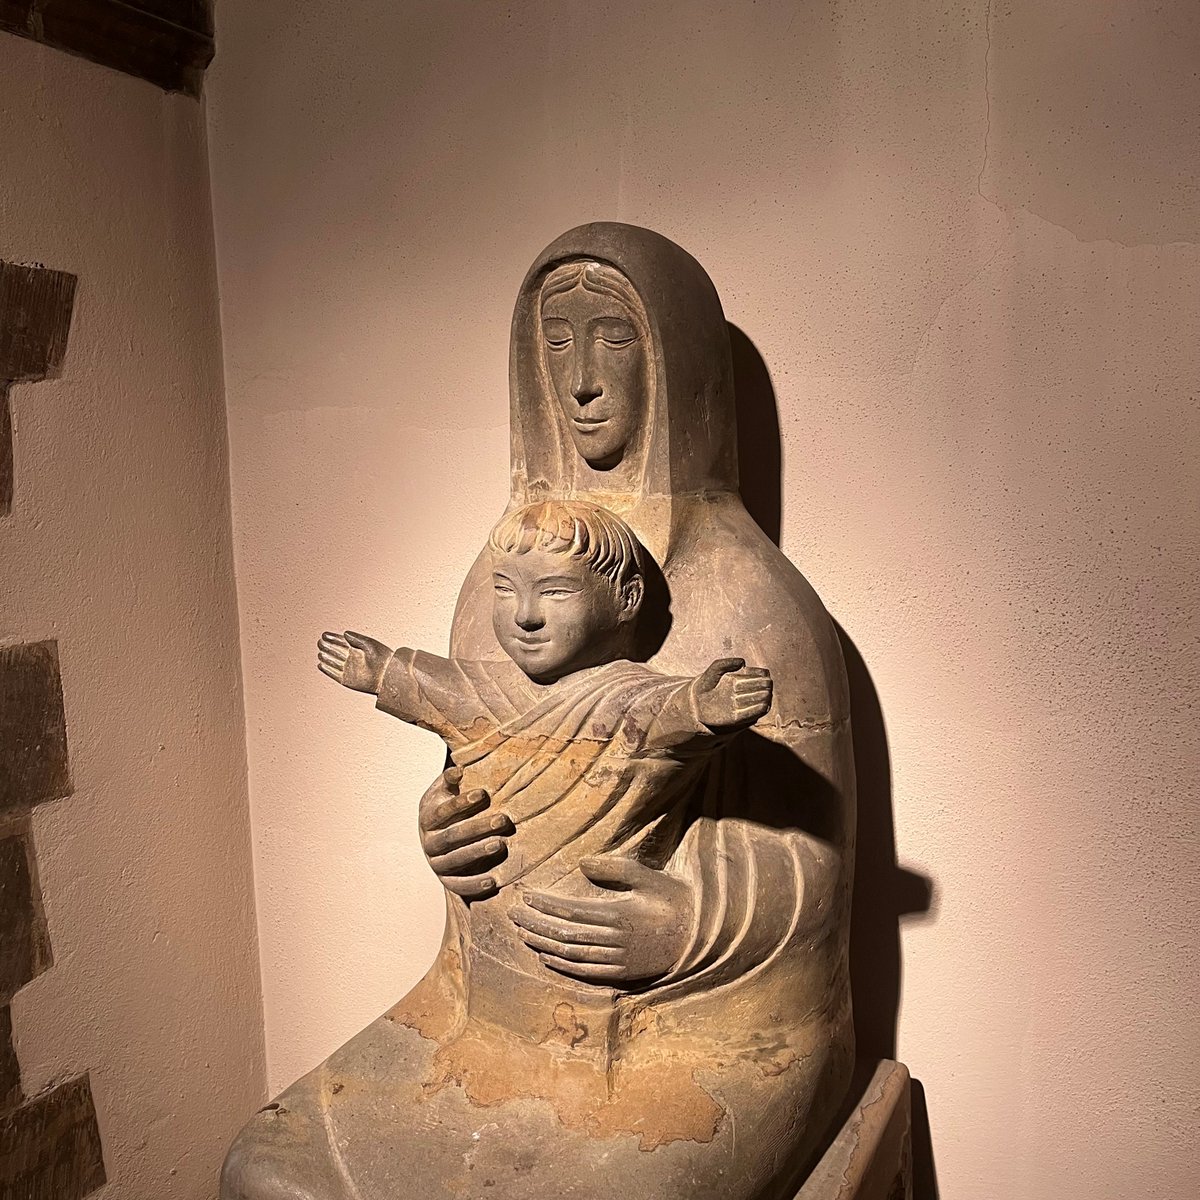 #StatueStories

This Madonna and Child statue can be found at the end of the crypt aisle. It was carved from Blue Horton stone by Jonah Jones around 1962 and was kindly gifted to the monastic community.

It is an inspirational piece that stands beautifully in its surroundings.